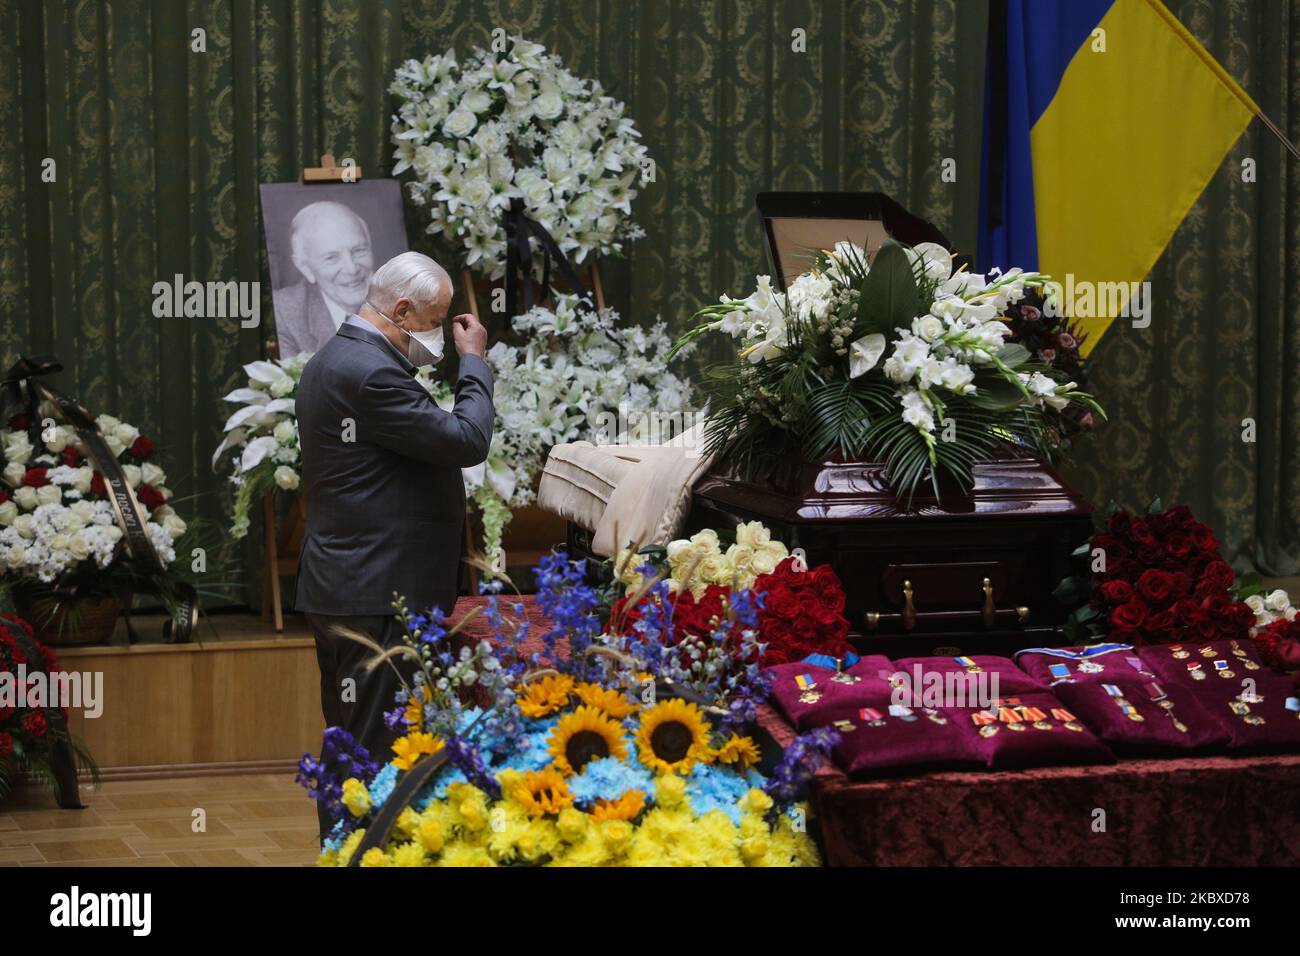 The first president of Ukraine Leonid Kravchuk stand near a coffin as he comes to pay his last tribute to Ukrainian scientist Borys Paton who has died in 101, in Kyiv, Ukraine, Augut 22, 2020. Ukraine mourn Borys Paton, prominent Ukrainian scientist in the field of welding processes, metallurgy and metal technology who died at 101. (Photo by Sergii Kharchenko/NurPhoto) Stock Photo